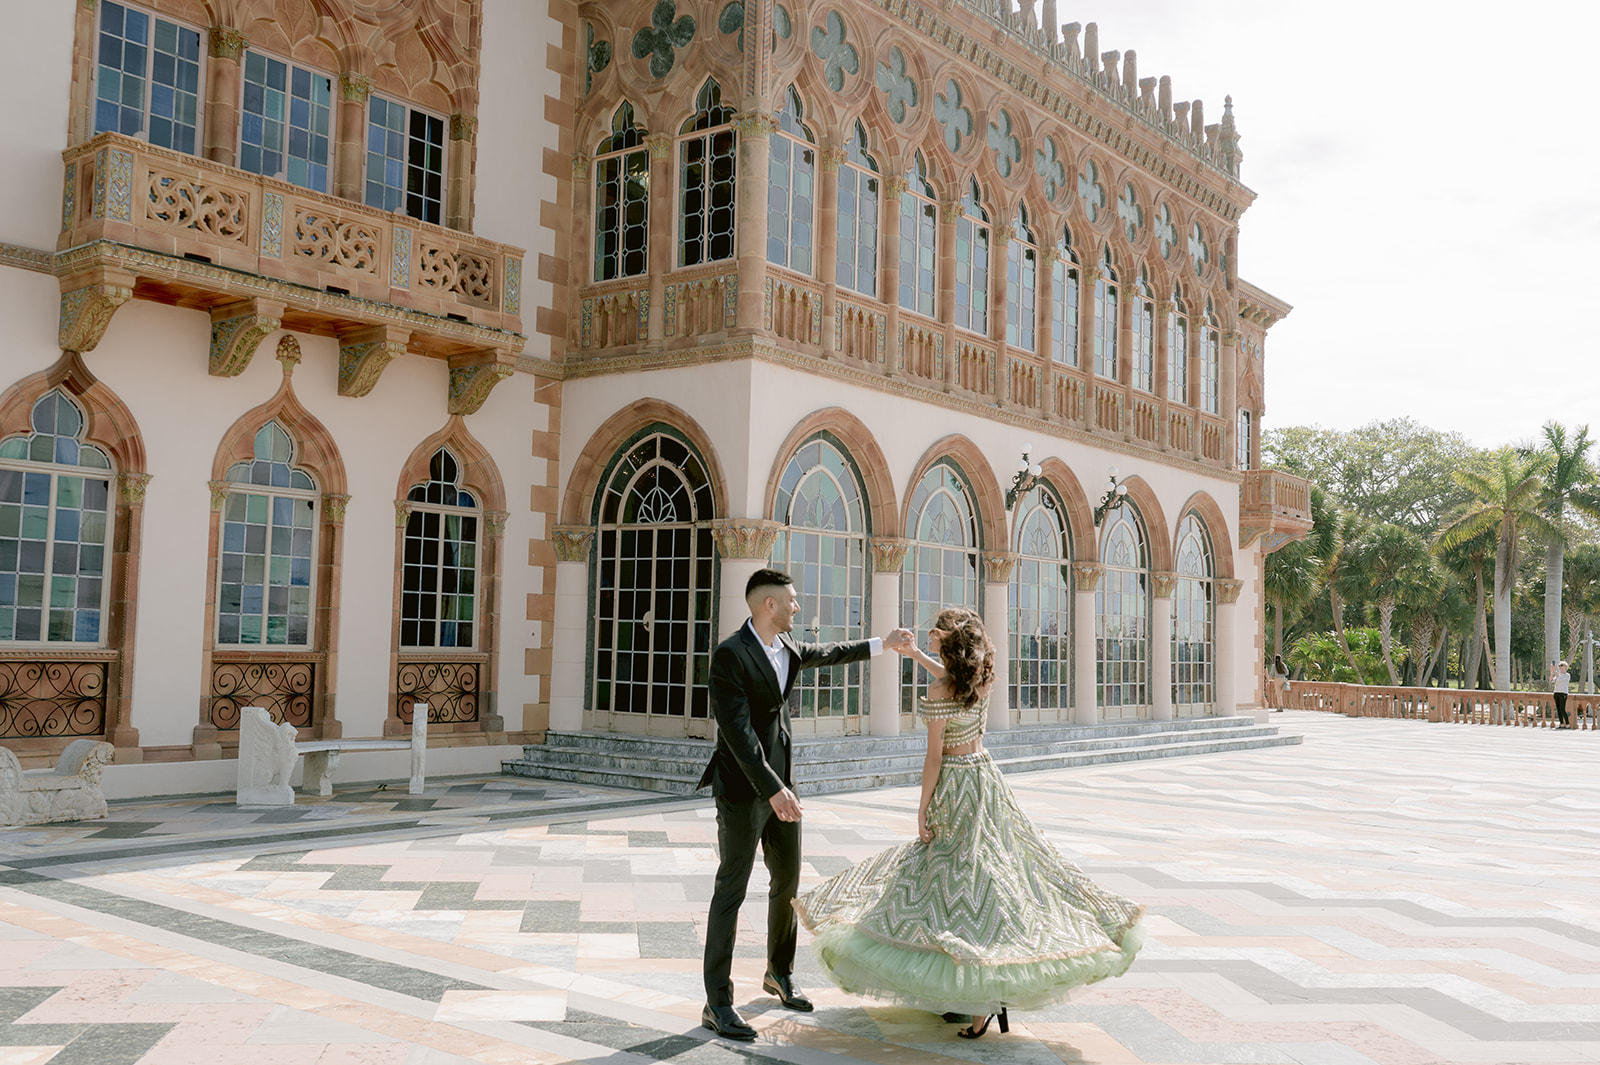 "Ringling Museum engagement shoot with Indian couple captures the beauty of the Ca' d'Zan mansion"
